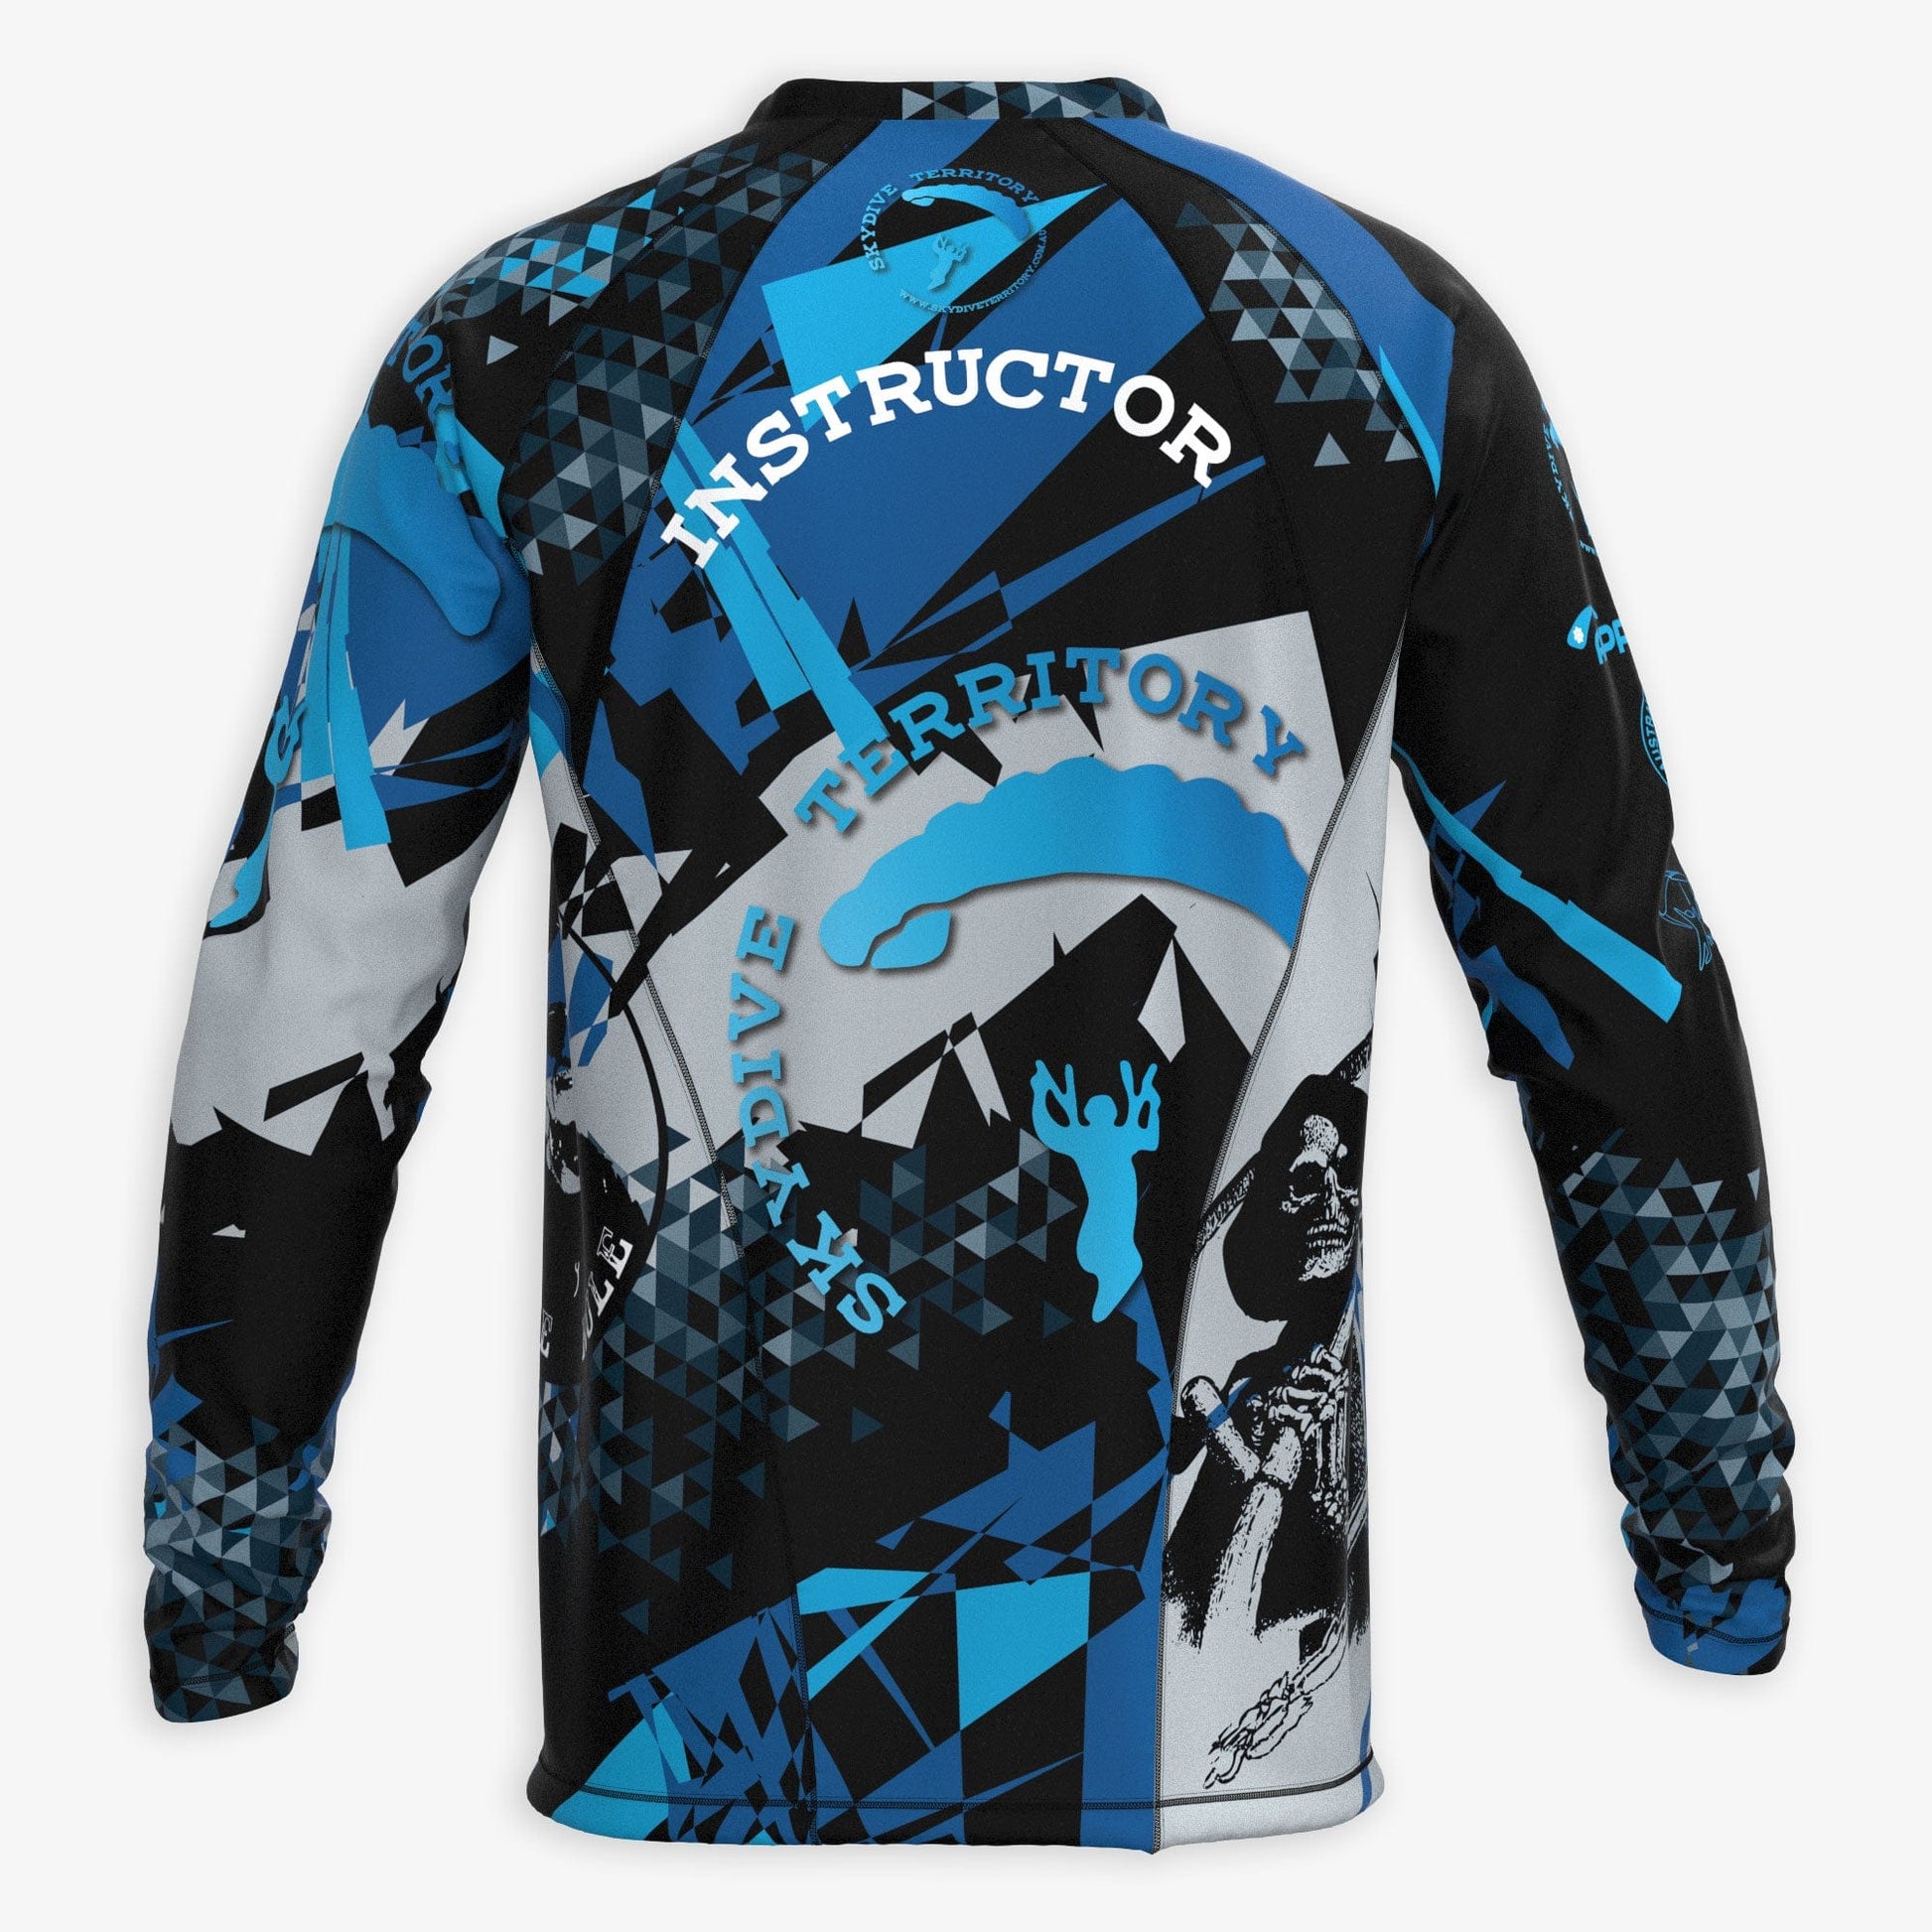 WS | Skydive Territory Jersey - Manufactory Apparel - Skydive Territory